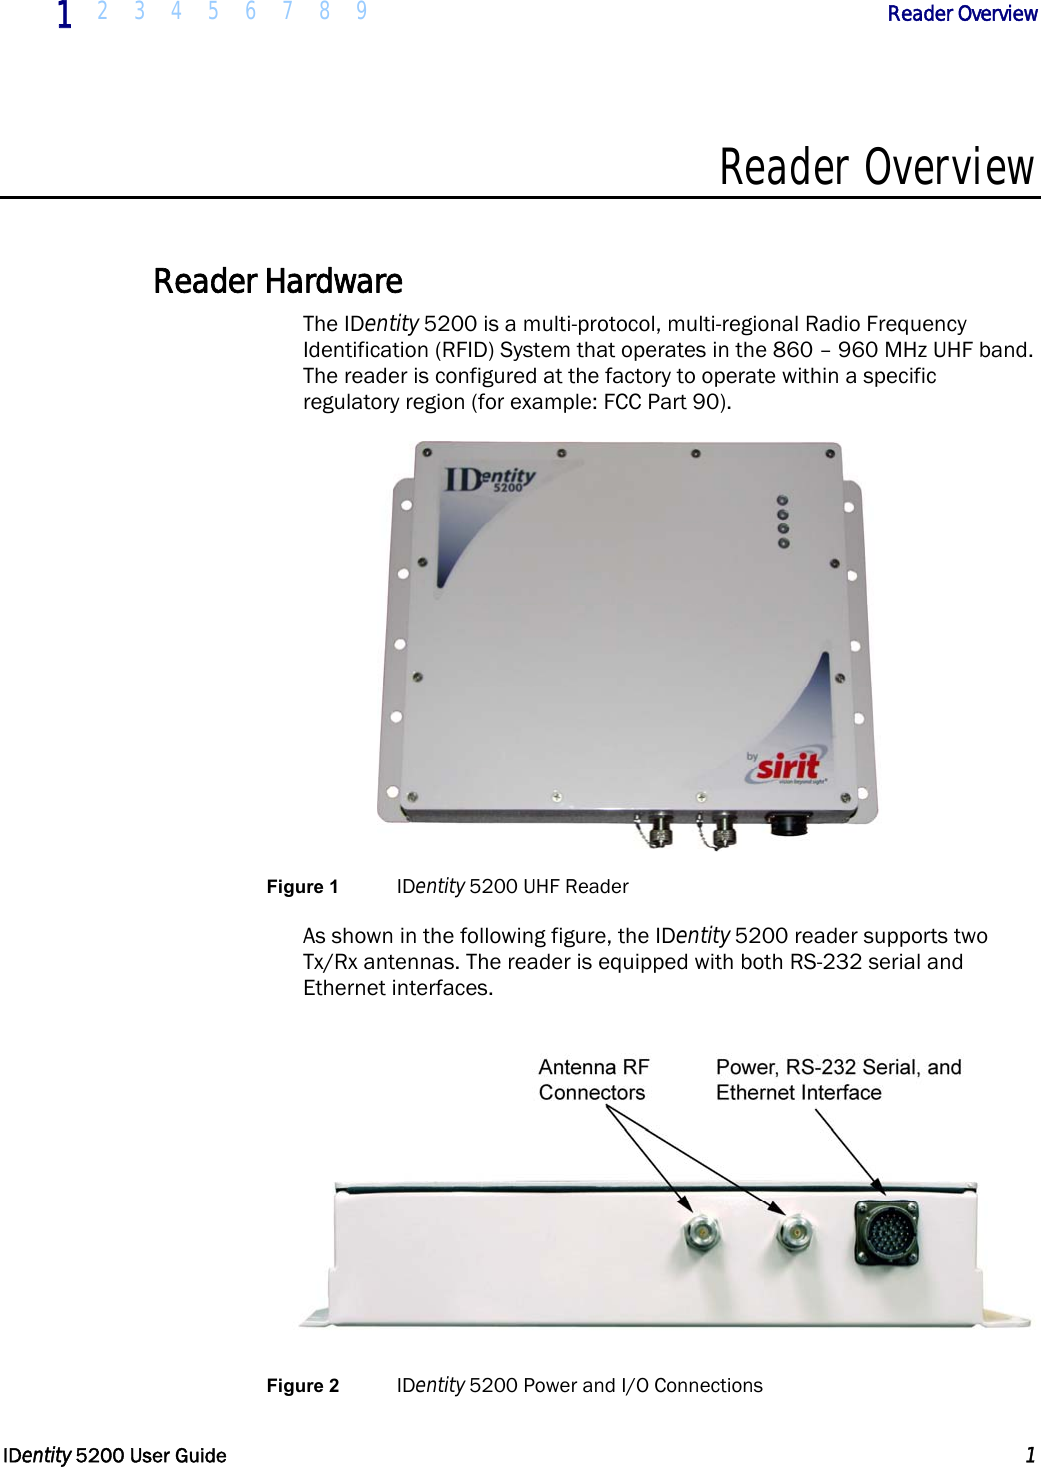  1 2 3 4 5 6 7 8 9            Reader Overview   IDentity 5200 User Guide  1  Reader Overview  Reader Hardware The IDentity 5200 is a multi-protocol, multi-regional Radio Frequency Identification (RFID) System that operates in the 860 – 960 MHz UHF band. The reader is configured at the factory to operate within a specific regulatory region (for example: FCC Part 90).  Figure 1 IDentity 5200 UHF Reader As shown in the following figure, the IDentity 5200 reader supports two Tx/Rx antennas. The reader is equipped with both RS-232 serial and Ethernet interfaces.   Figure 2 IDentity 5200 Power and I/O Connections 